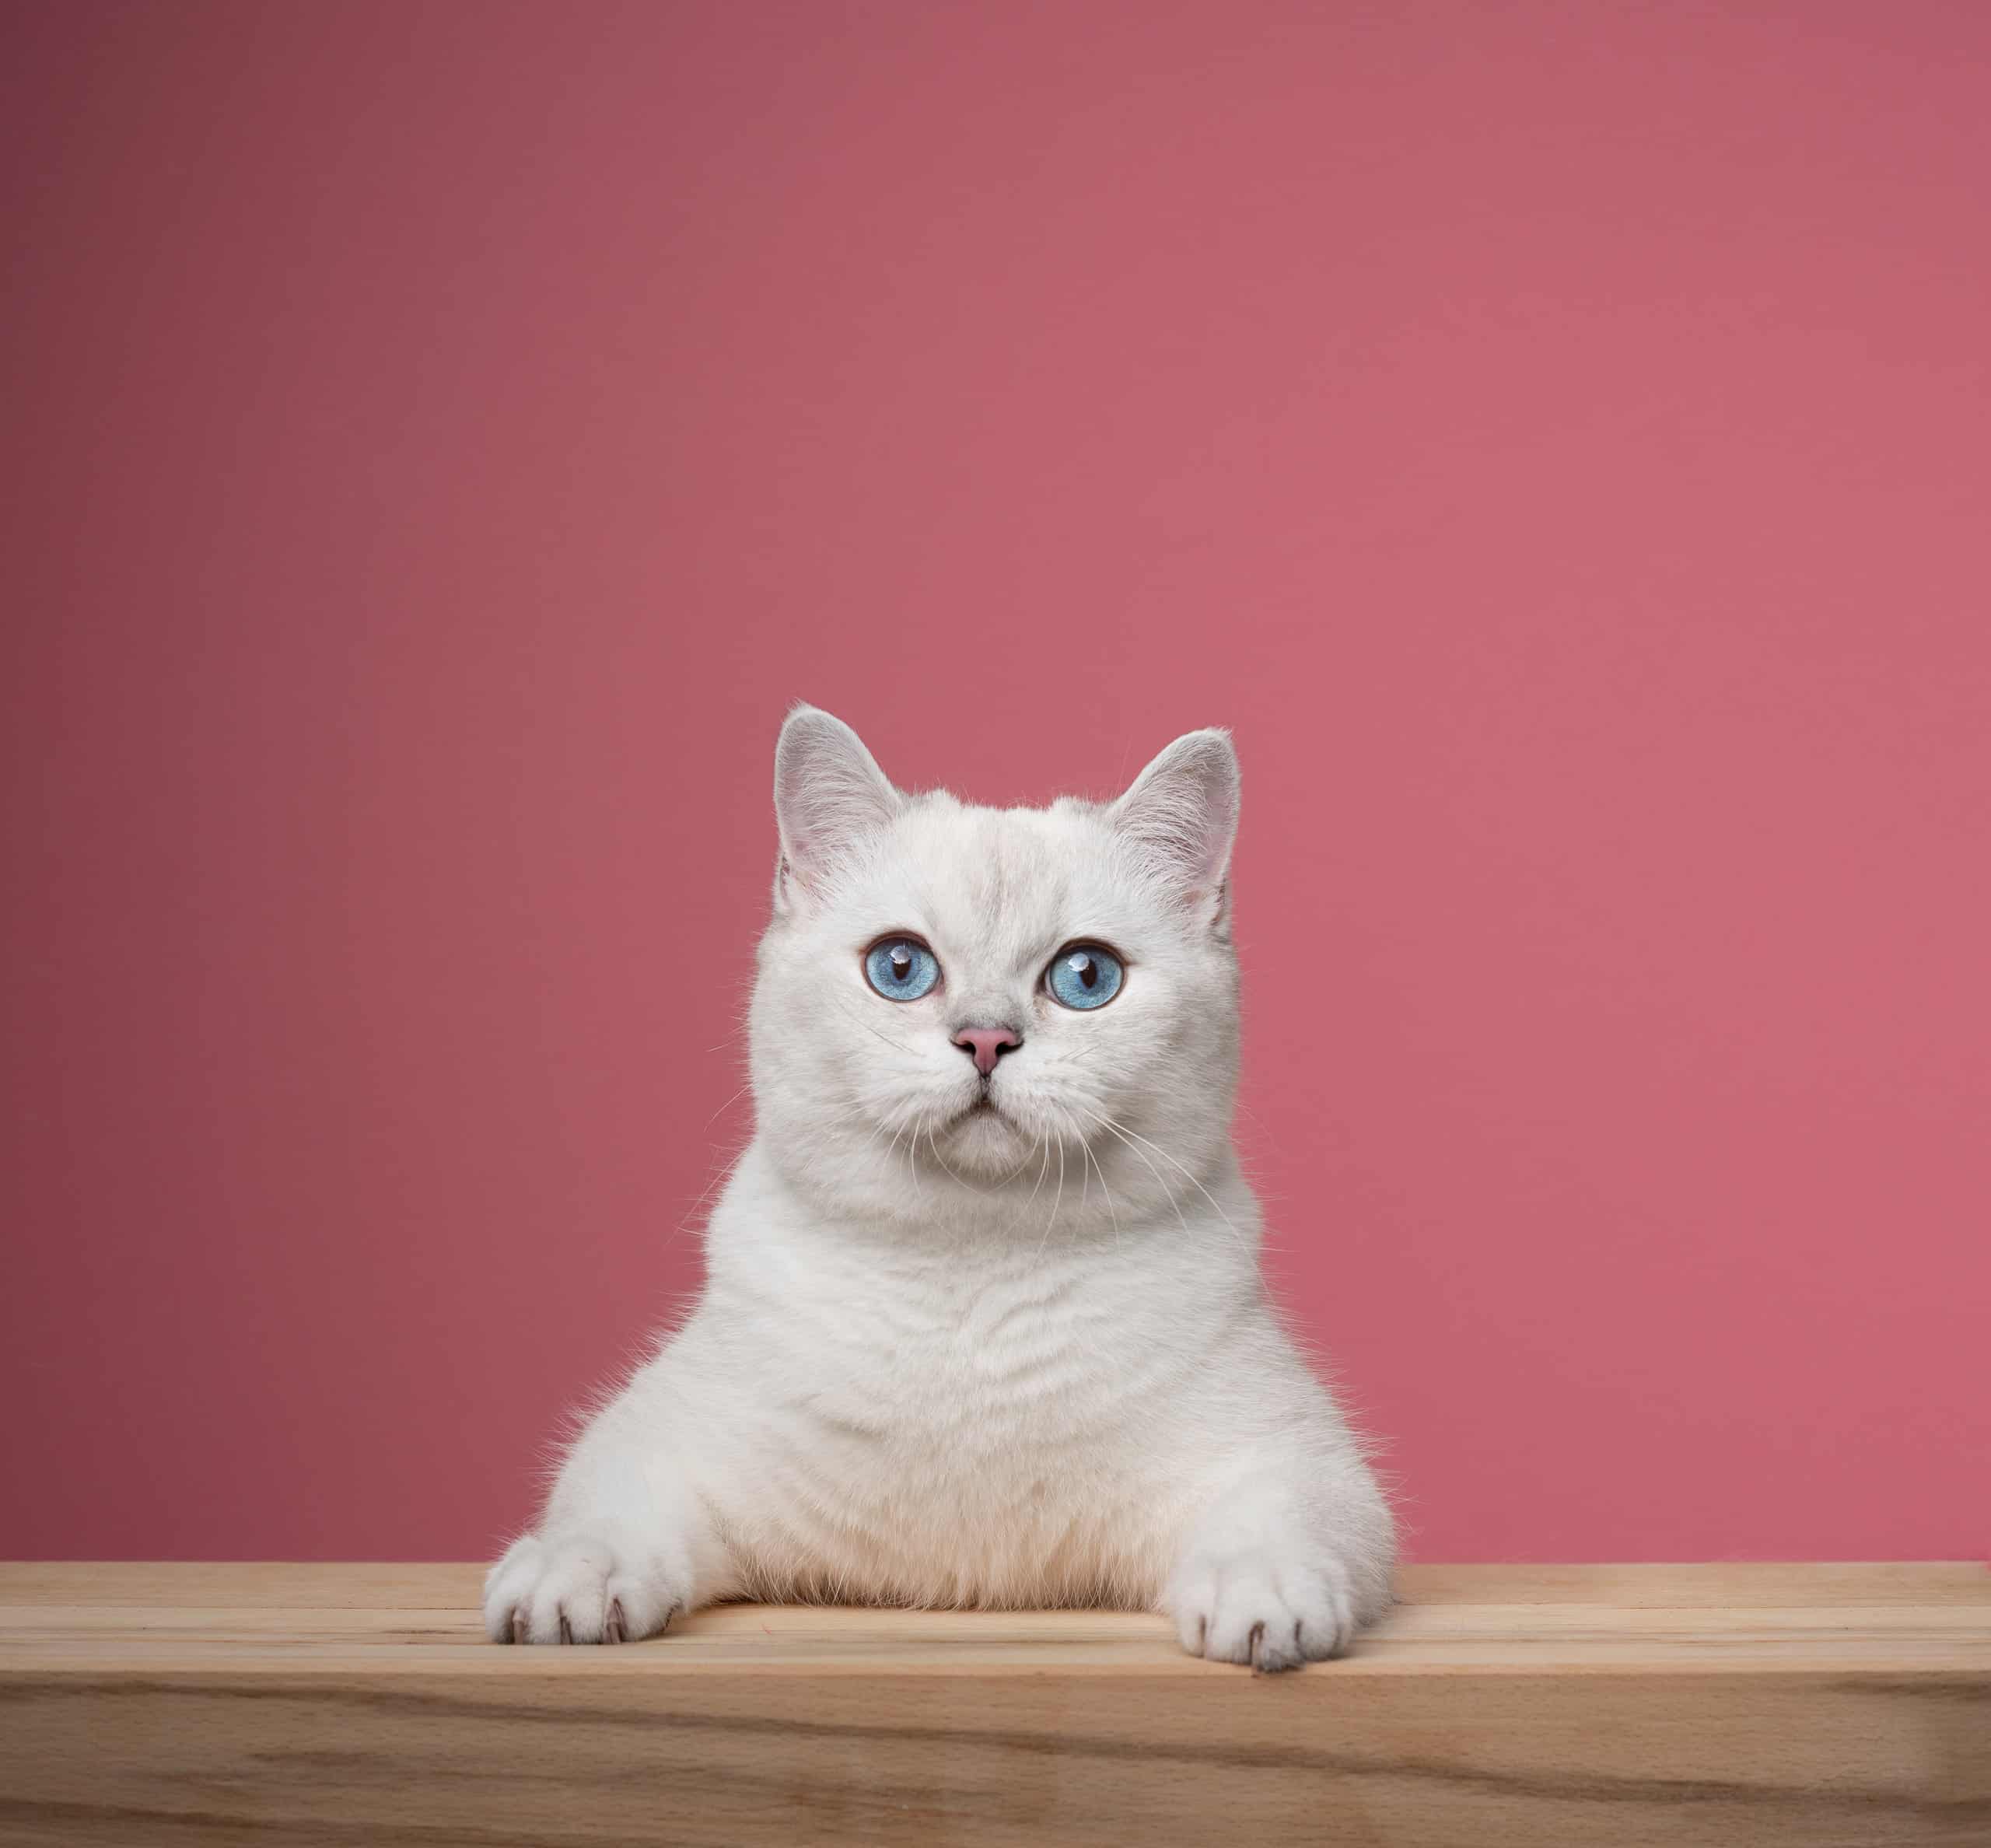 cute white British Shorthair cat leaning on wooden counter portrait on pink background